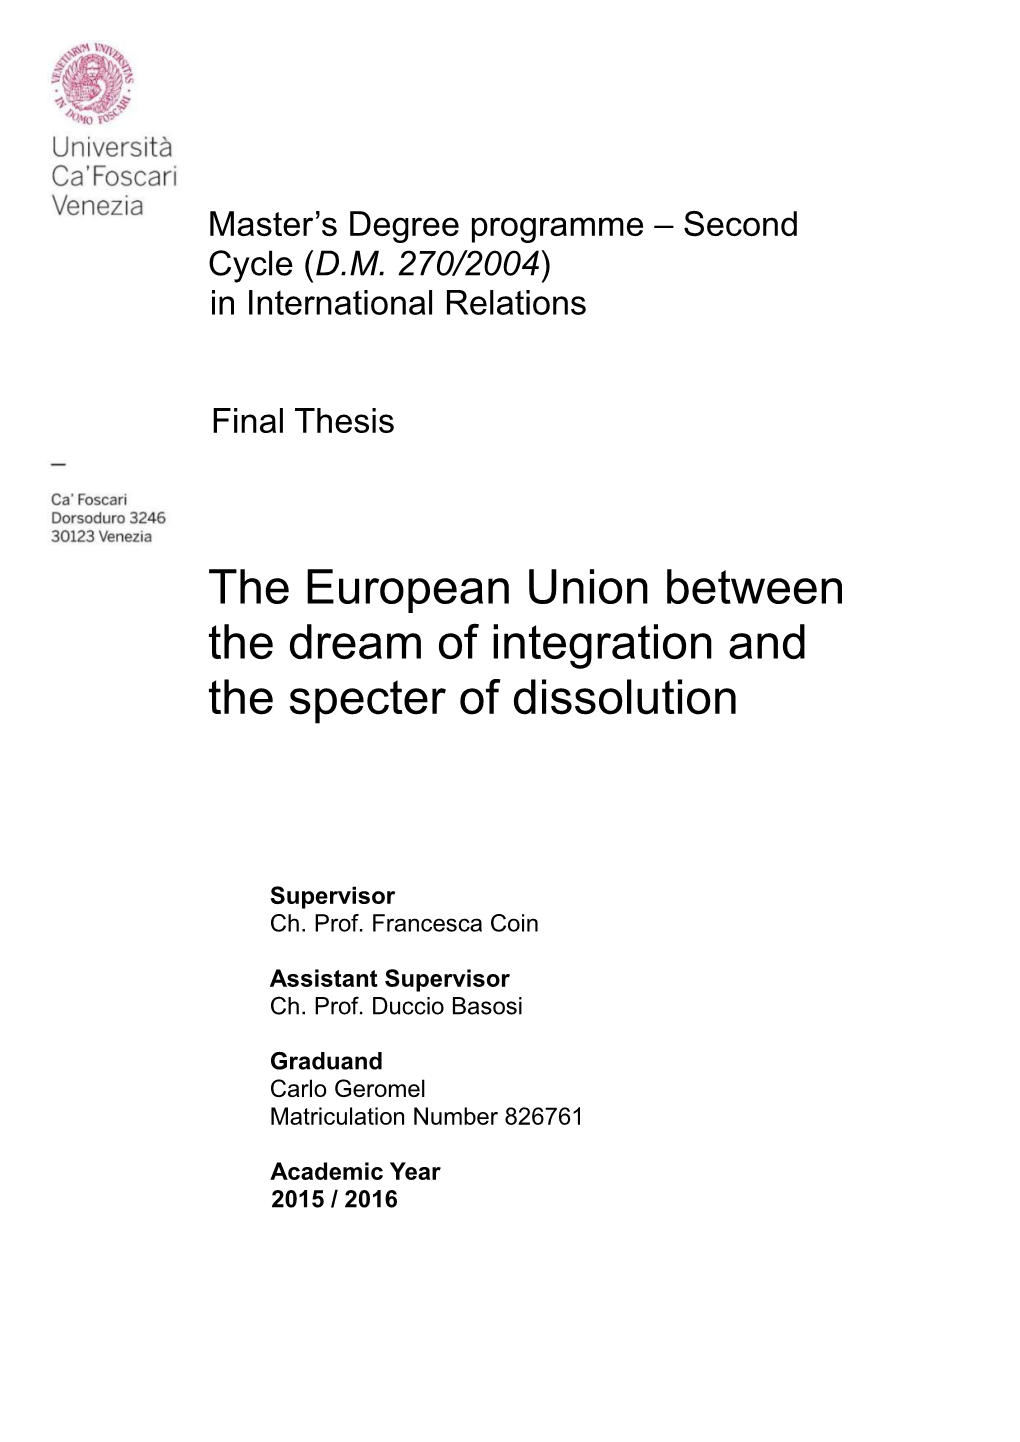 The European Union Between the Dream of Integration and the Specter of Dissolution